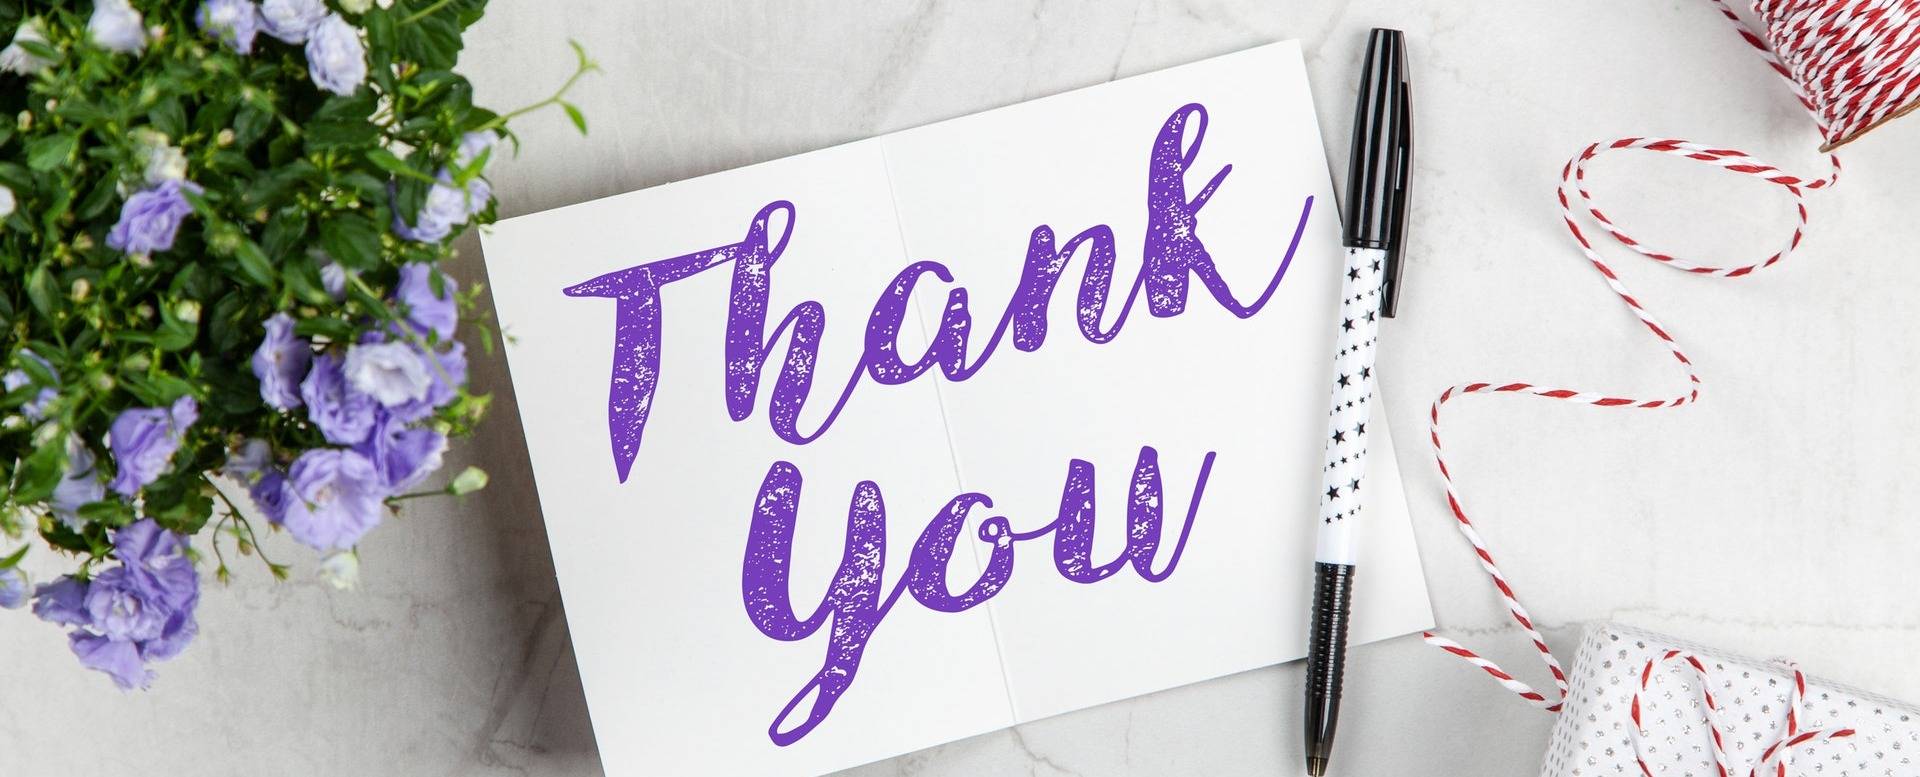 22 Thank-You Letter Examples for Extending Gratitude to Your